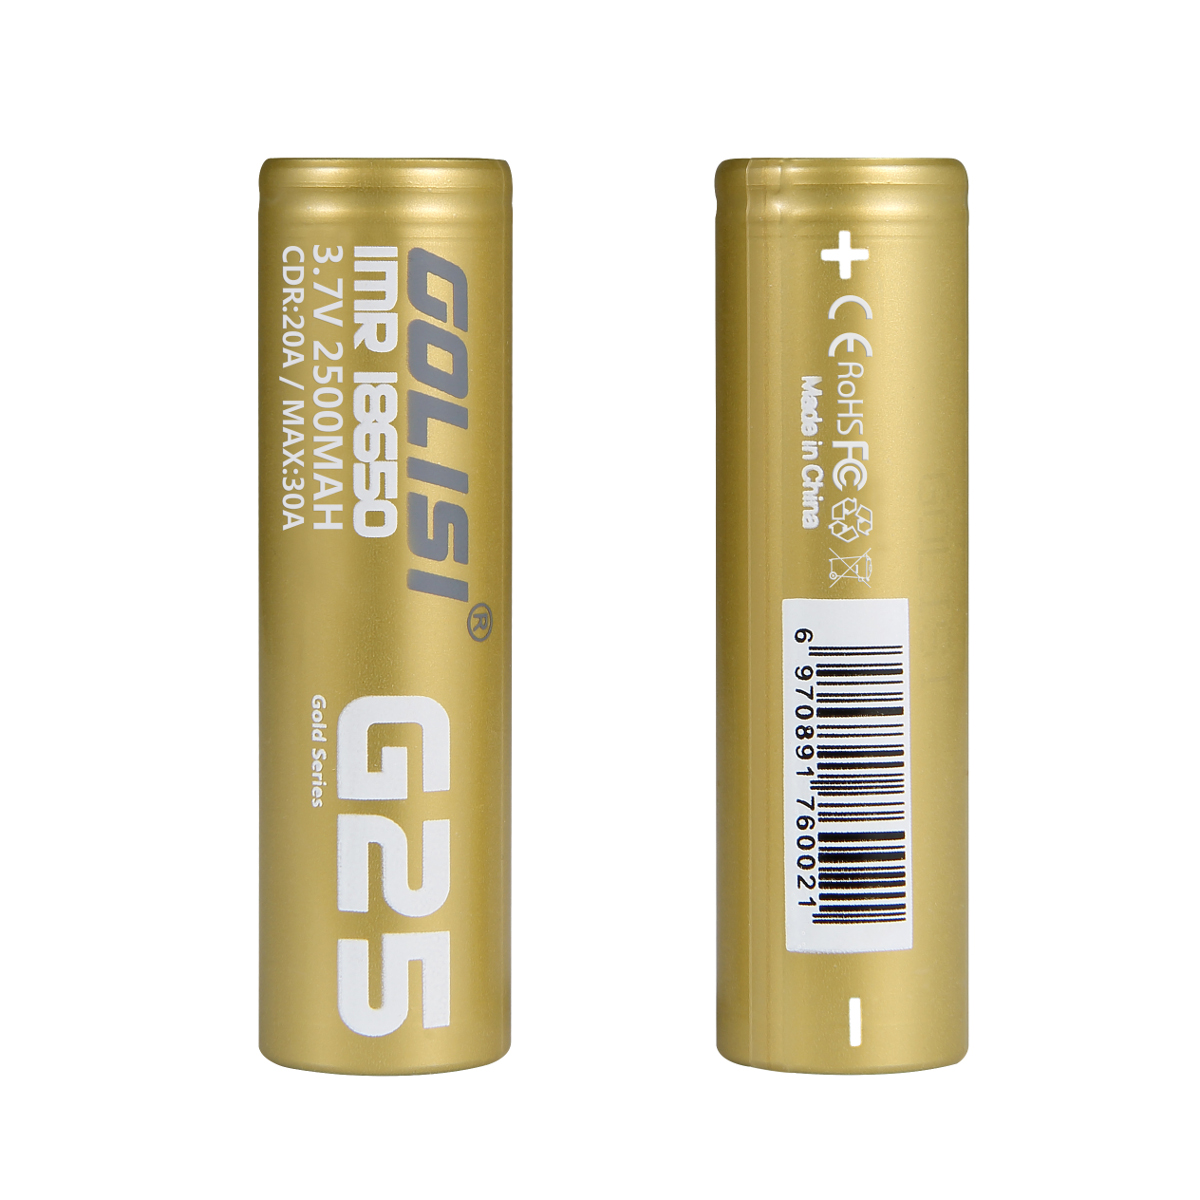 

2Pcs GOLISI G25 2500mAh 20A CDR High Brain Powerful IMR 18650 Li-ion Rechargeable Battery With Storage Case